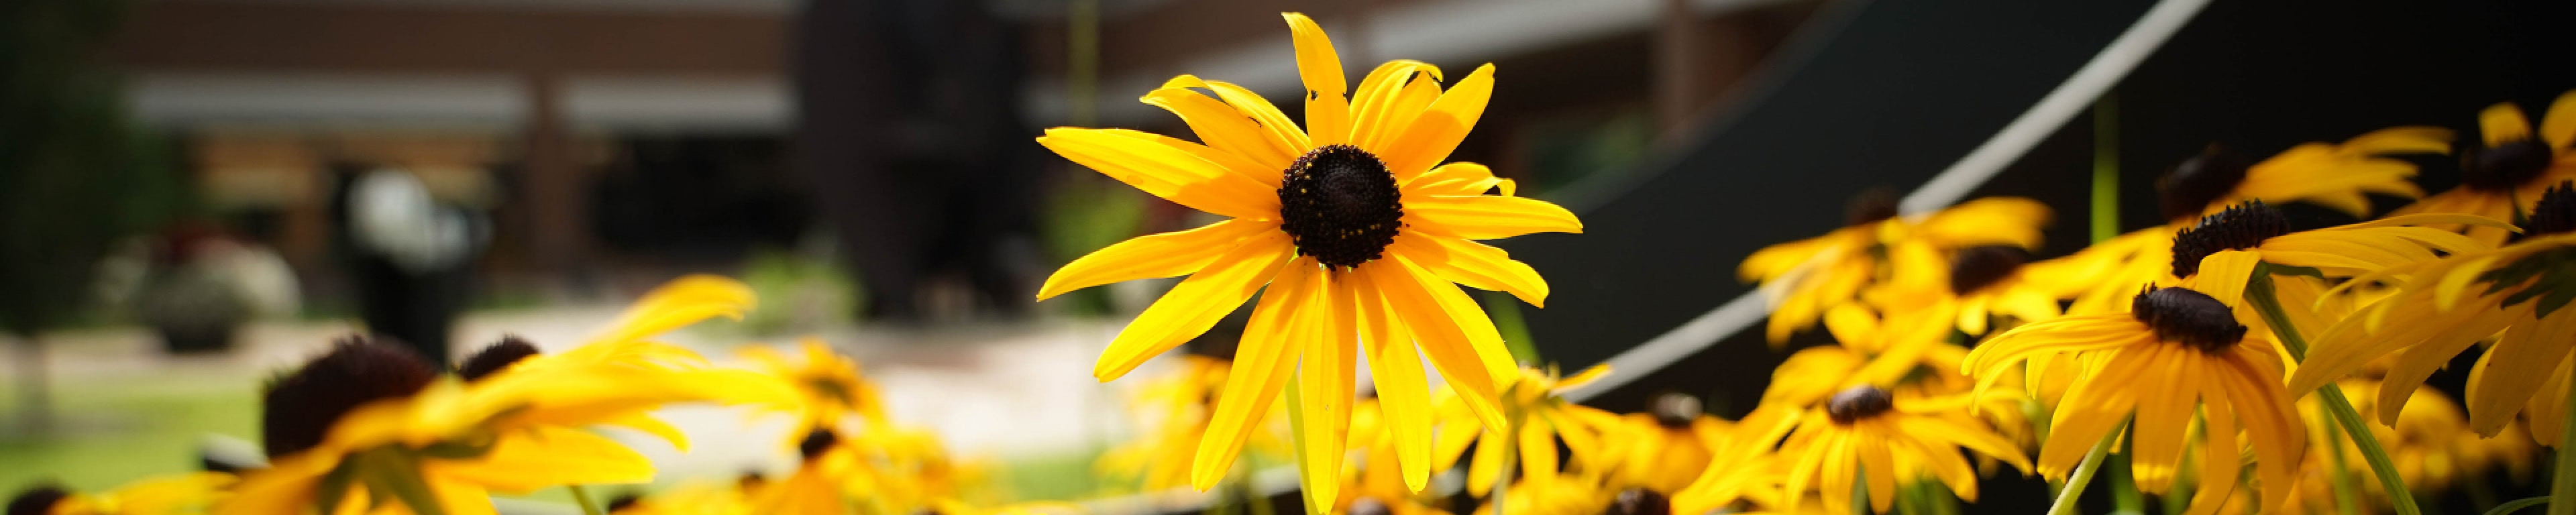 Yello black eyed Susan flowers in the sunlight.